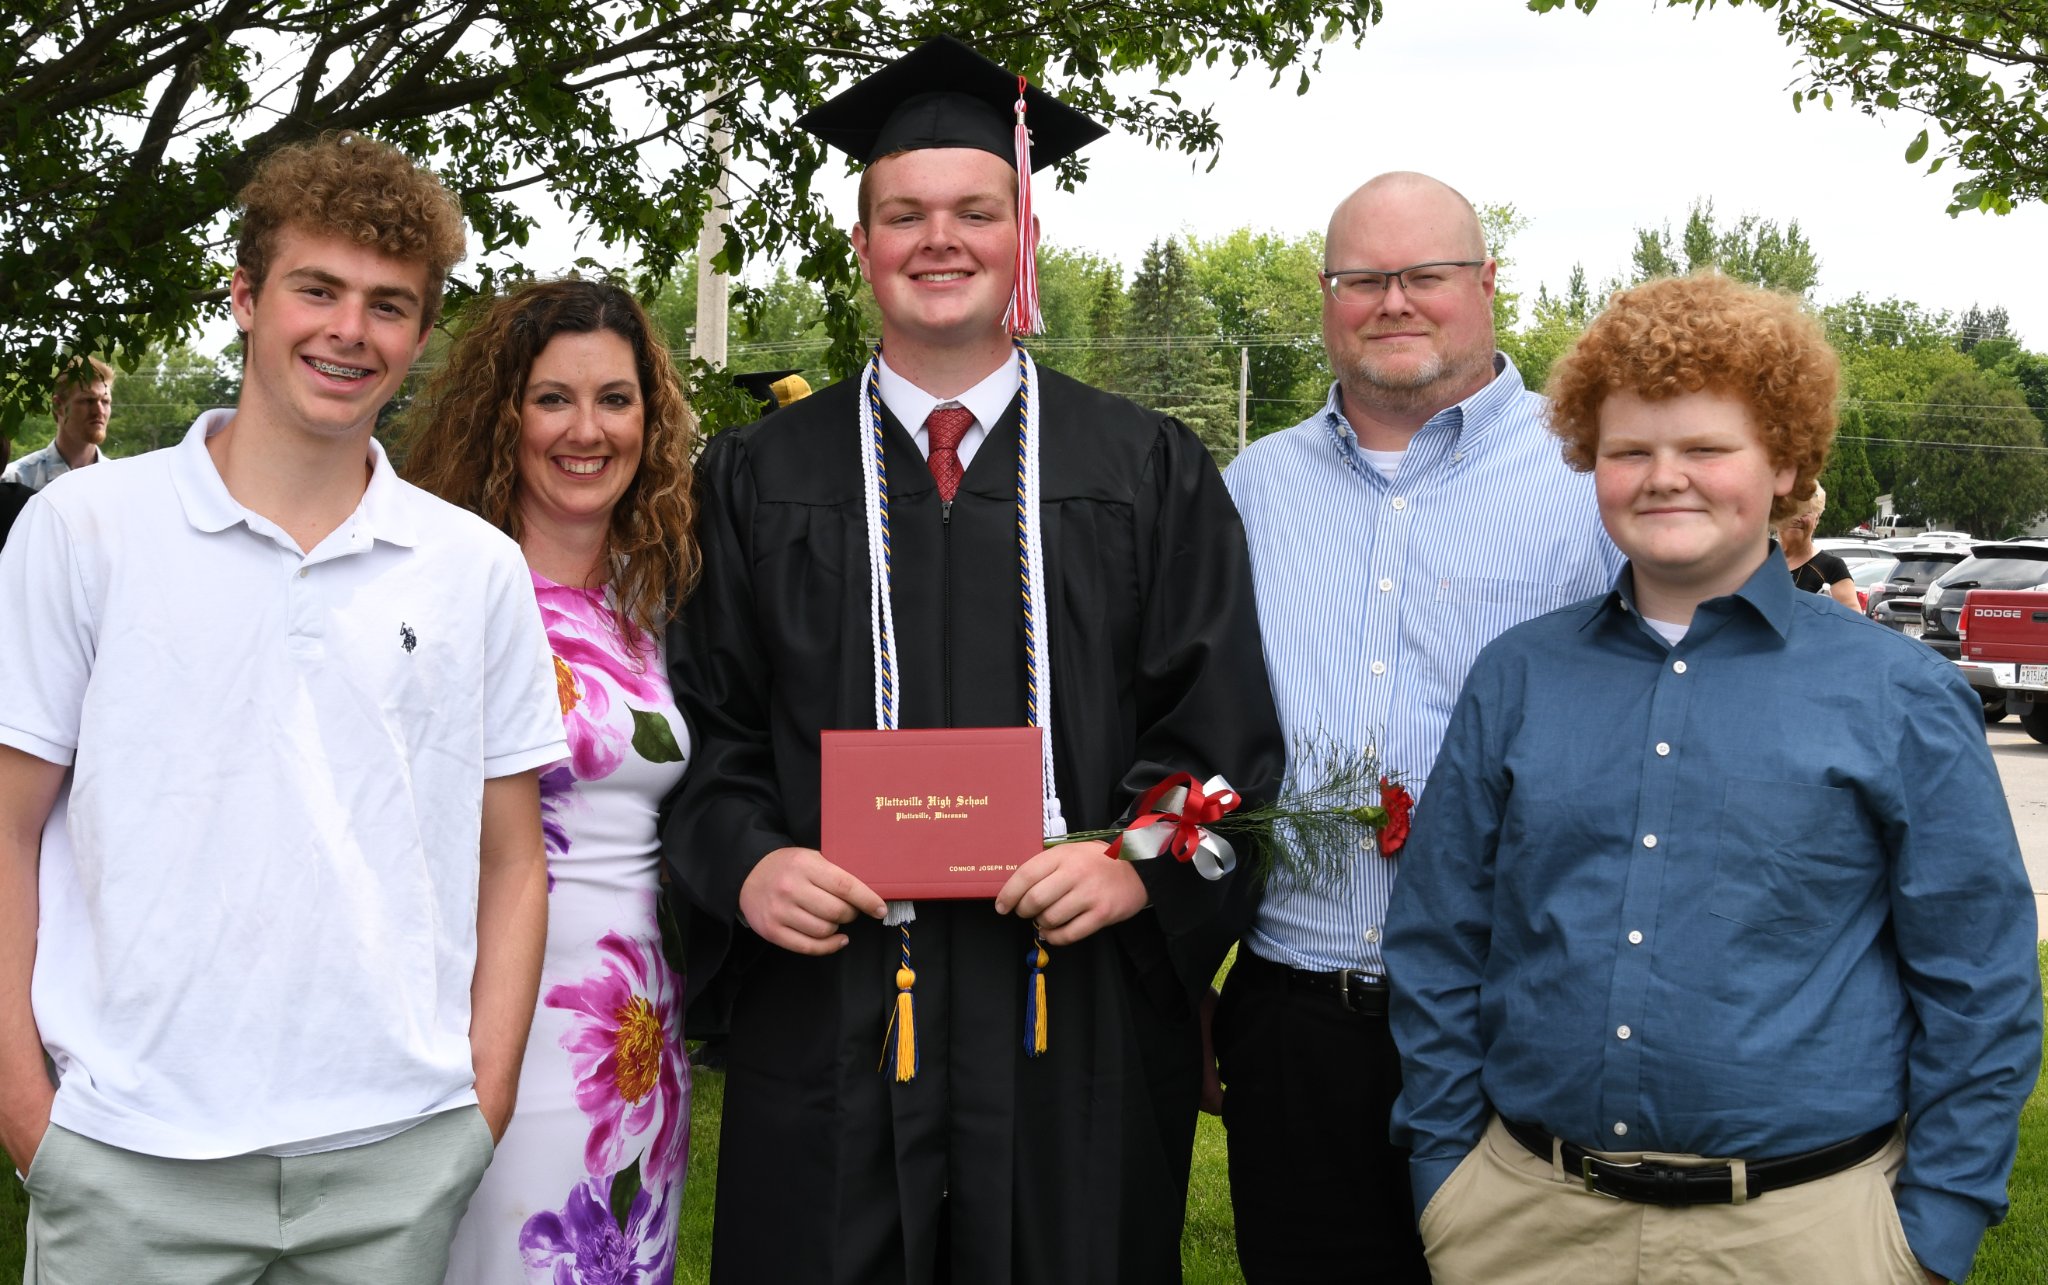 This is a photo of my family at my graduation